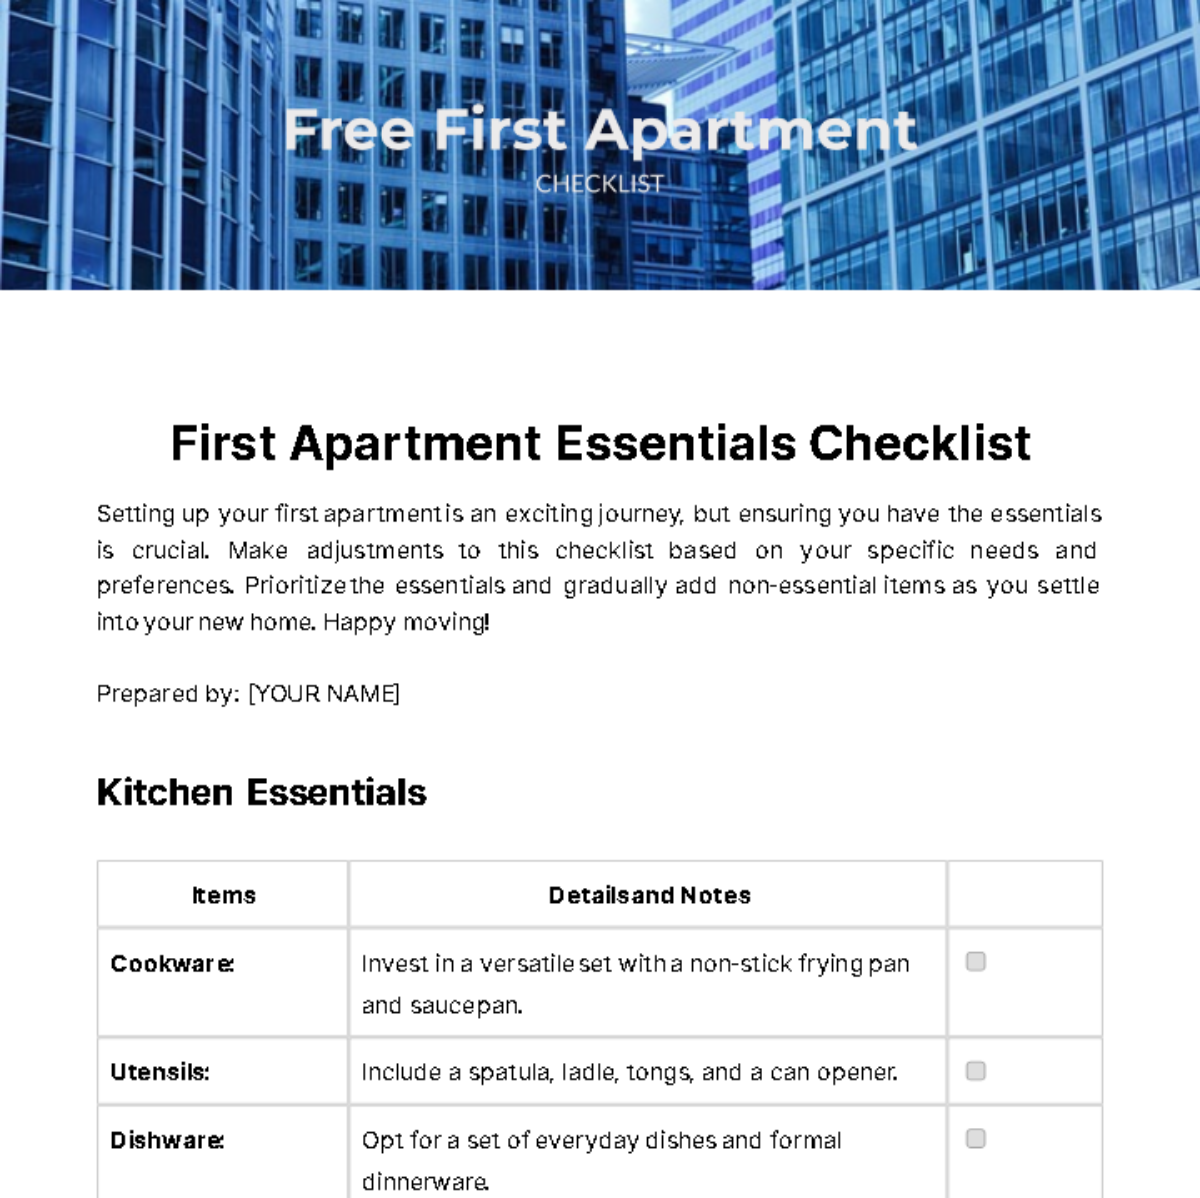 Free First Apartment Checklist Template